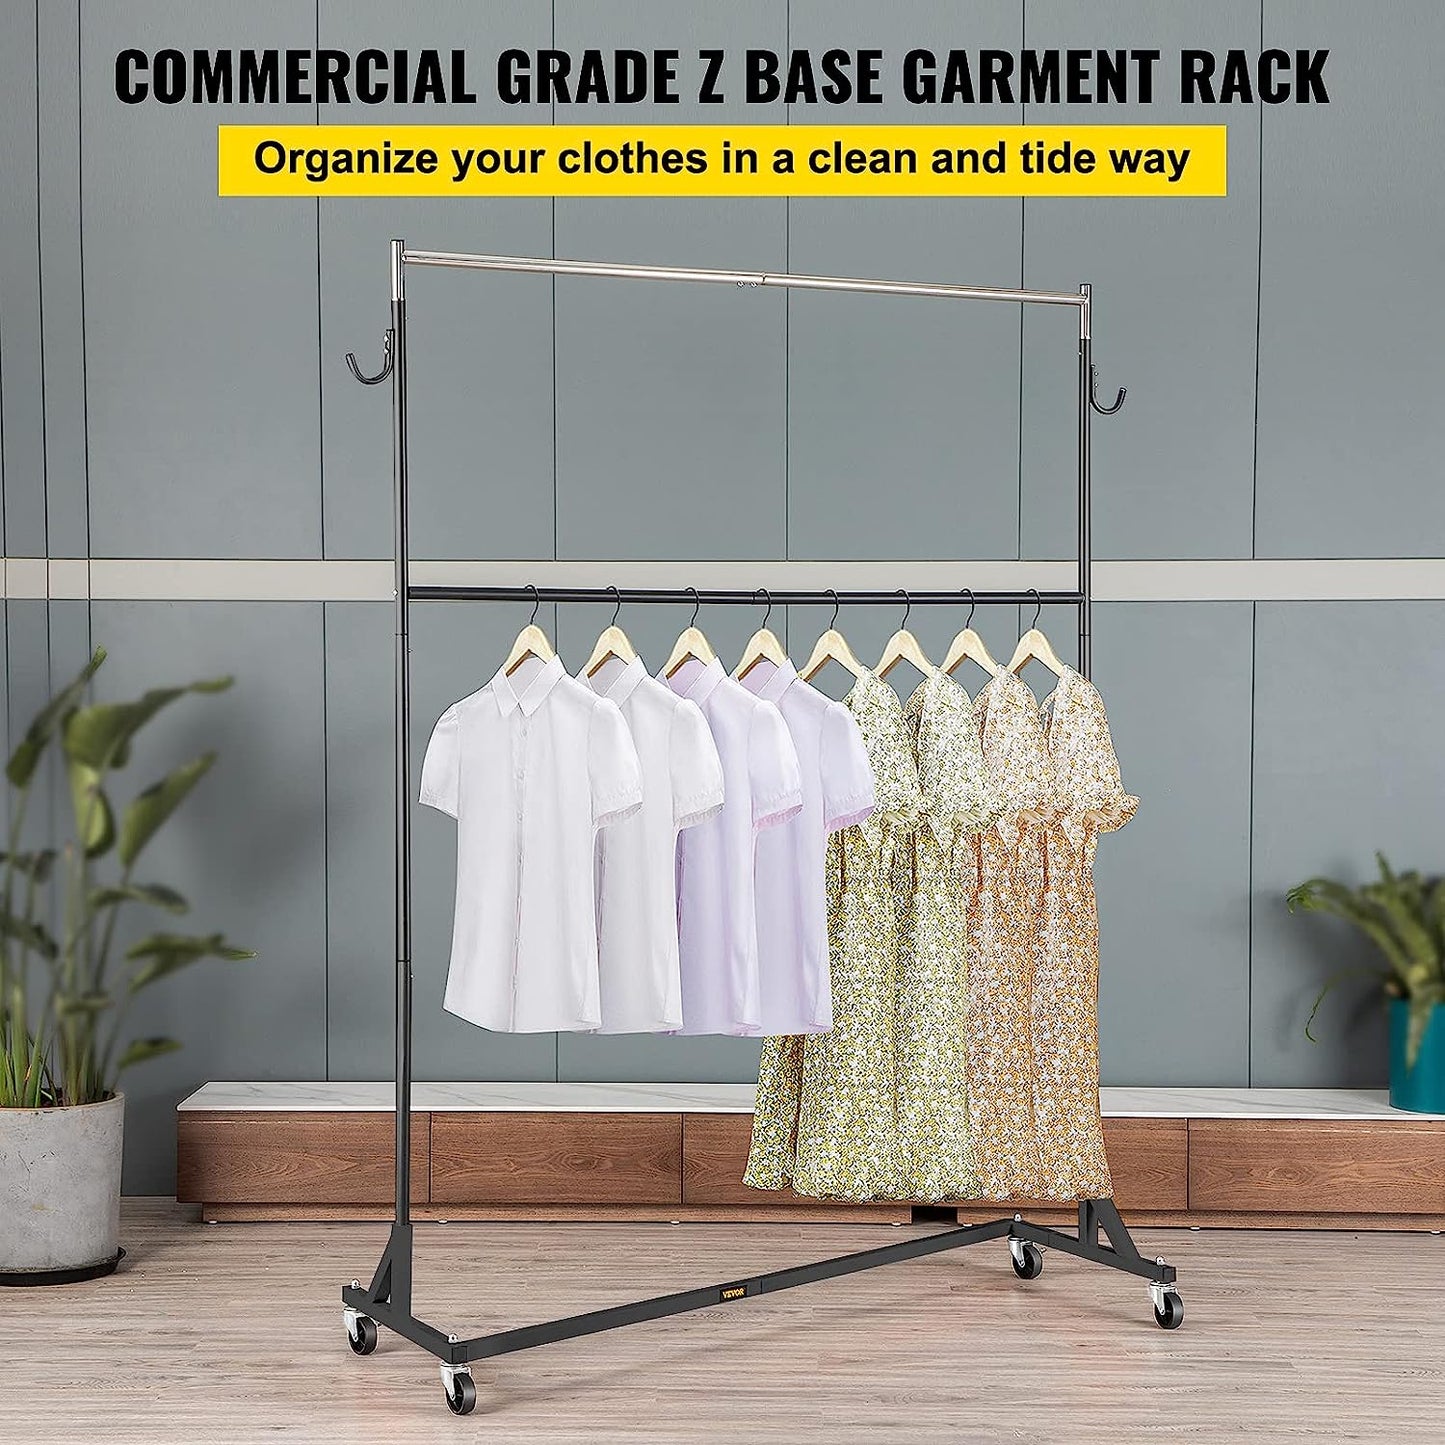 Z Rack, 300 lbs Industrial Grade Z Base Garment Rack, 24" x 62" x 85" Height Adjustable Clothes Rack, Heavy Duty Clothing Rack w/ Lockable Casters for Home Store w/ Add-on Hang Rail Black